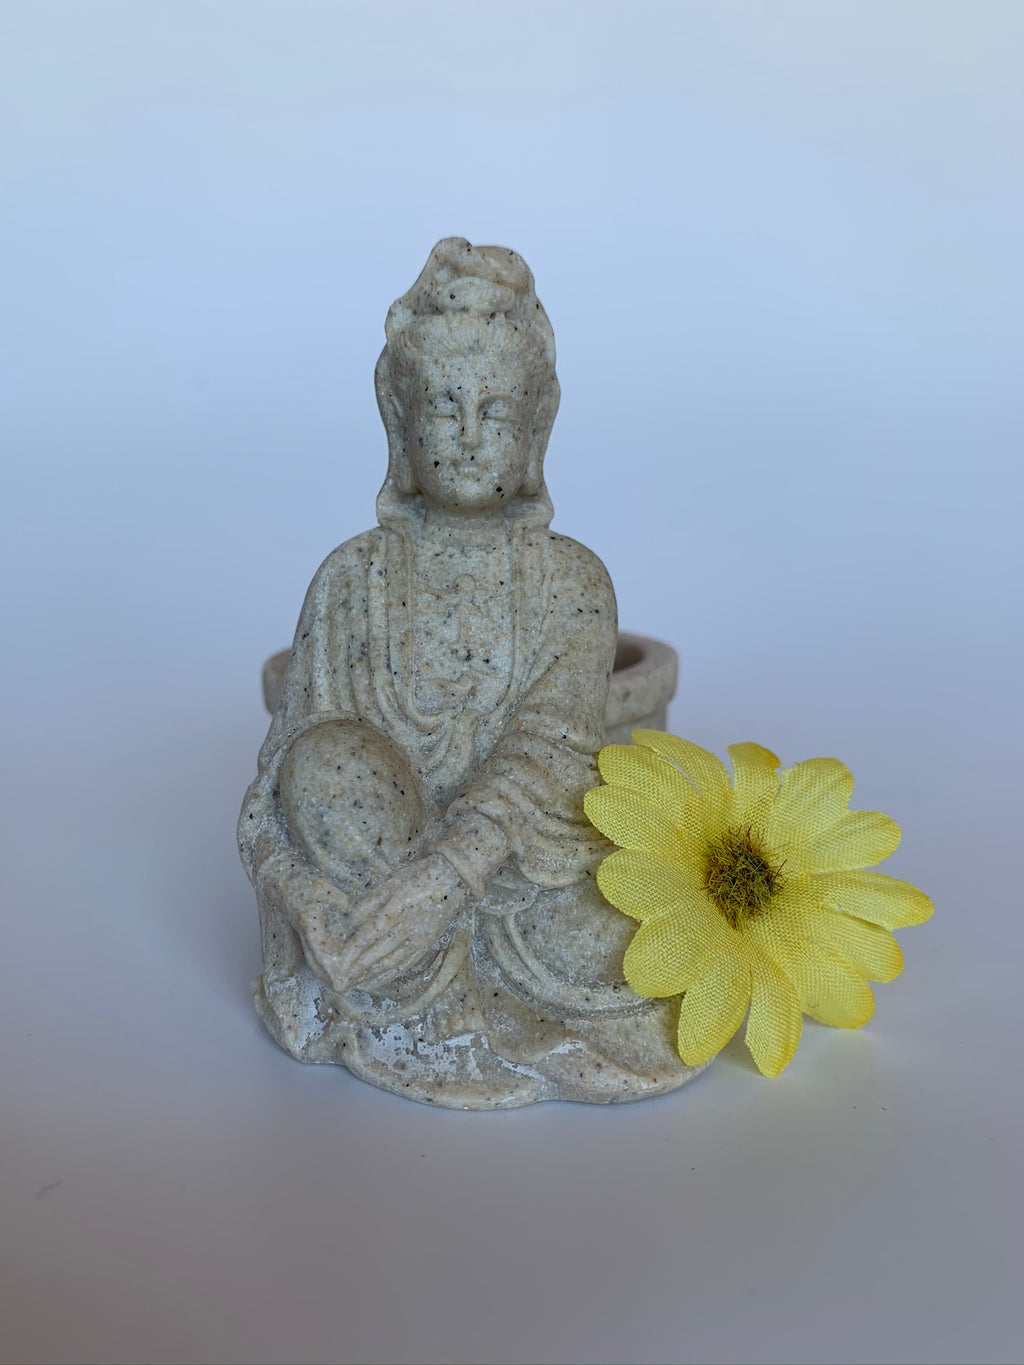 Beautiful sandstone Kwan Yin candle holder - a welcome addition to your altar, mediation space or simply to add to the décor of your home. Add a votive candle to increase the ambiance or to use as a focus during spiritual practice. Kwan Yin is a revered and powerful goddess. She symbolizes compassion, mercy and kindness. Approximately 3¼" tall.